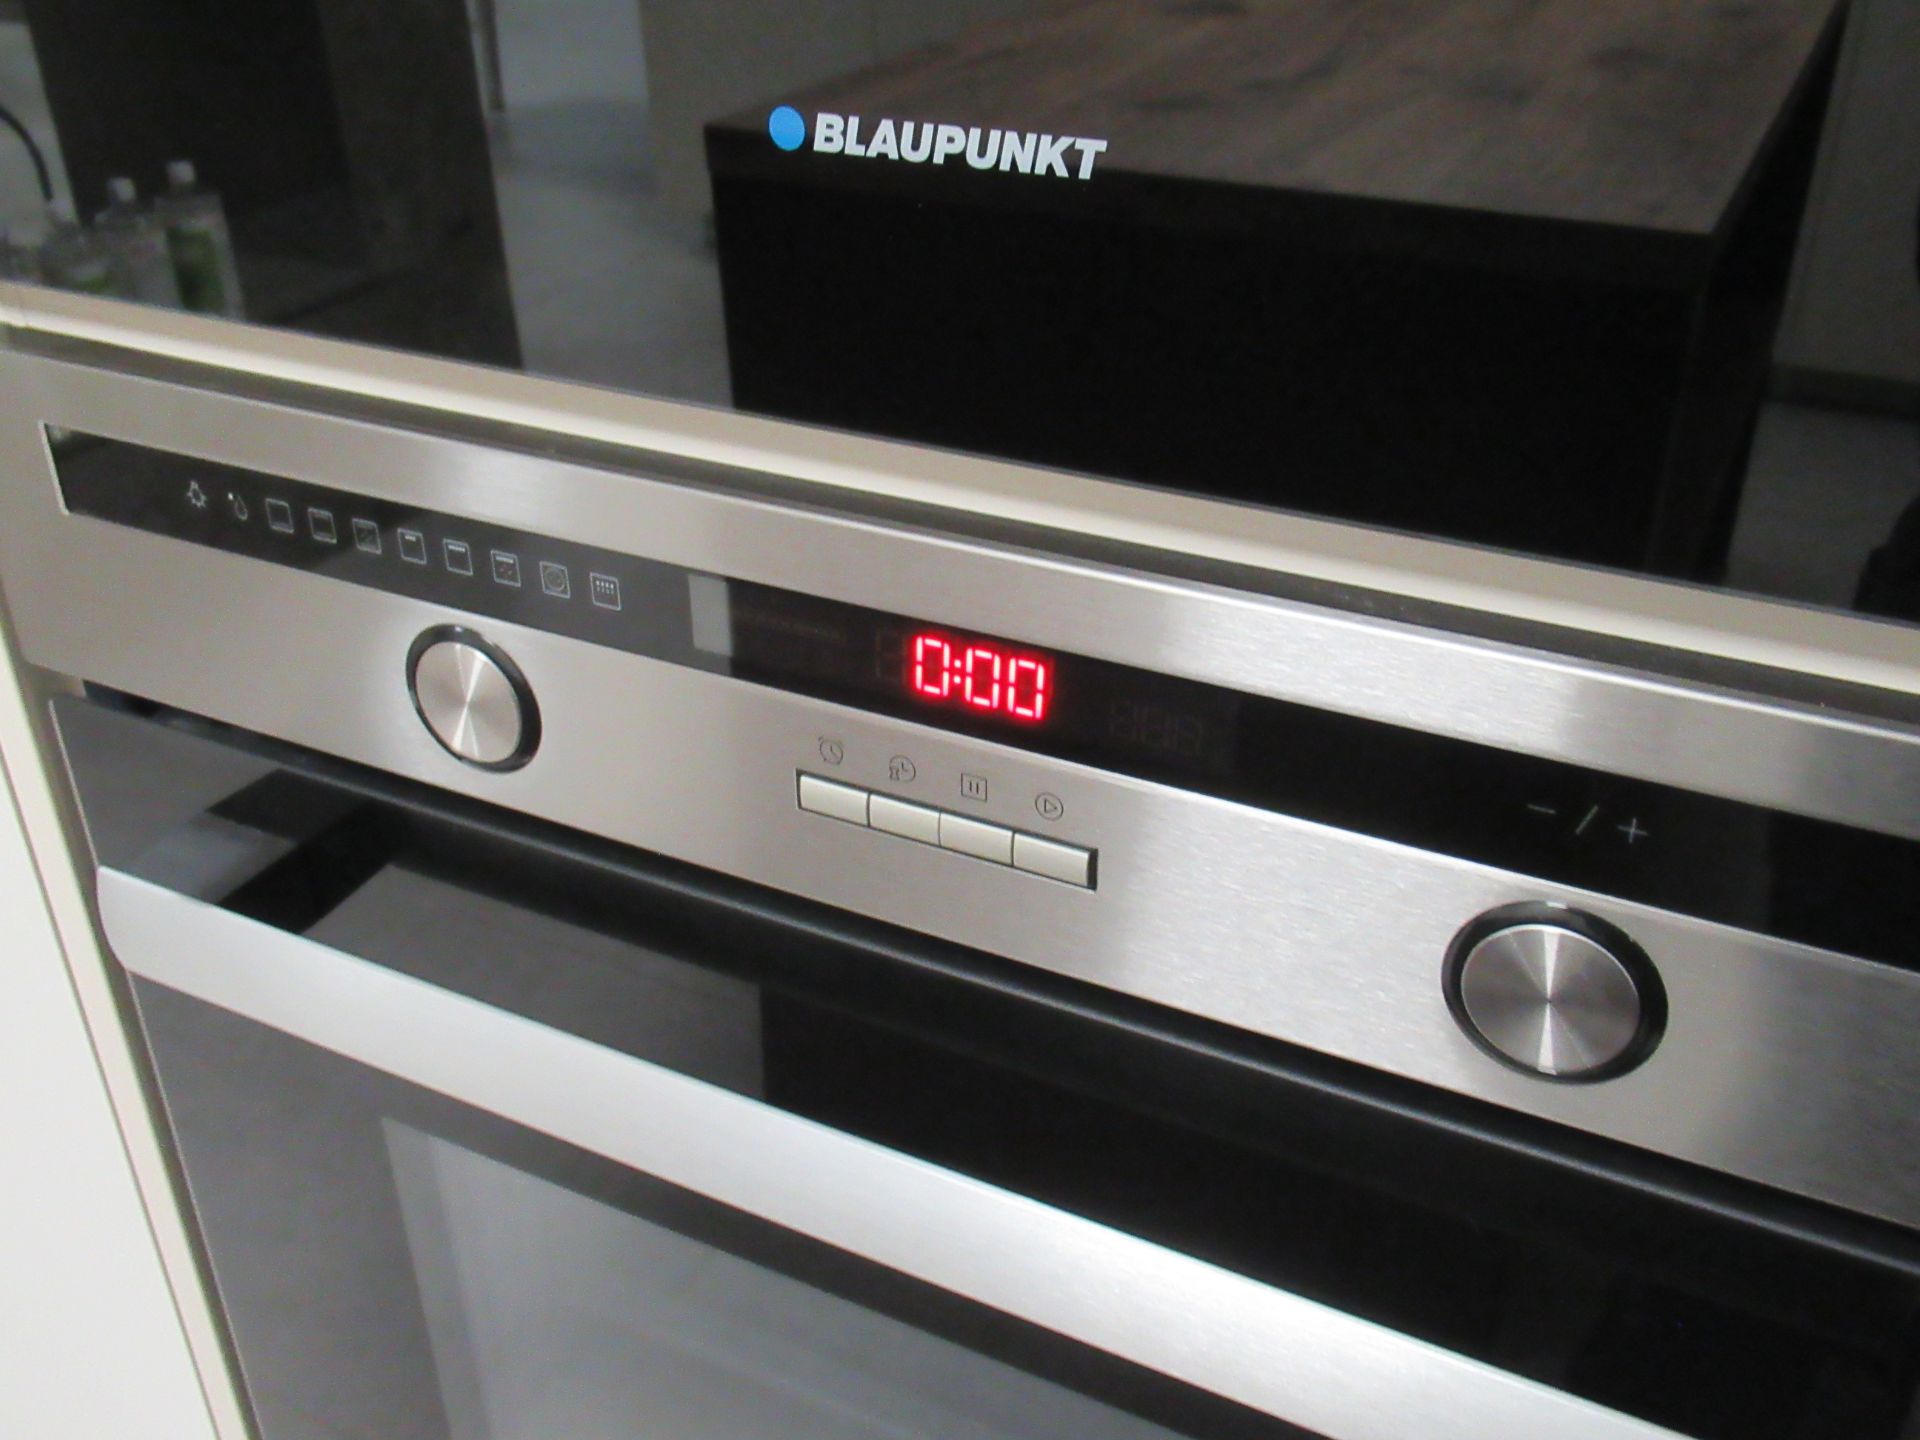 Blaupunkt 5B36PO250GB Built-In Oven - Image 4 of 5